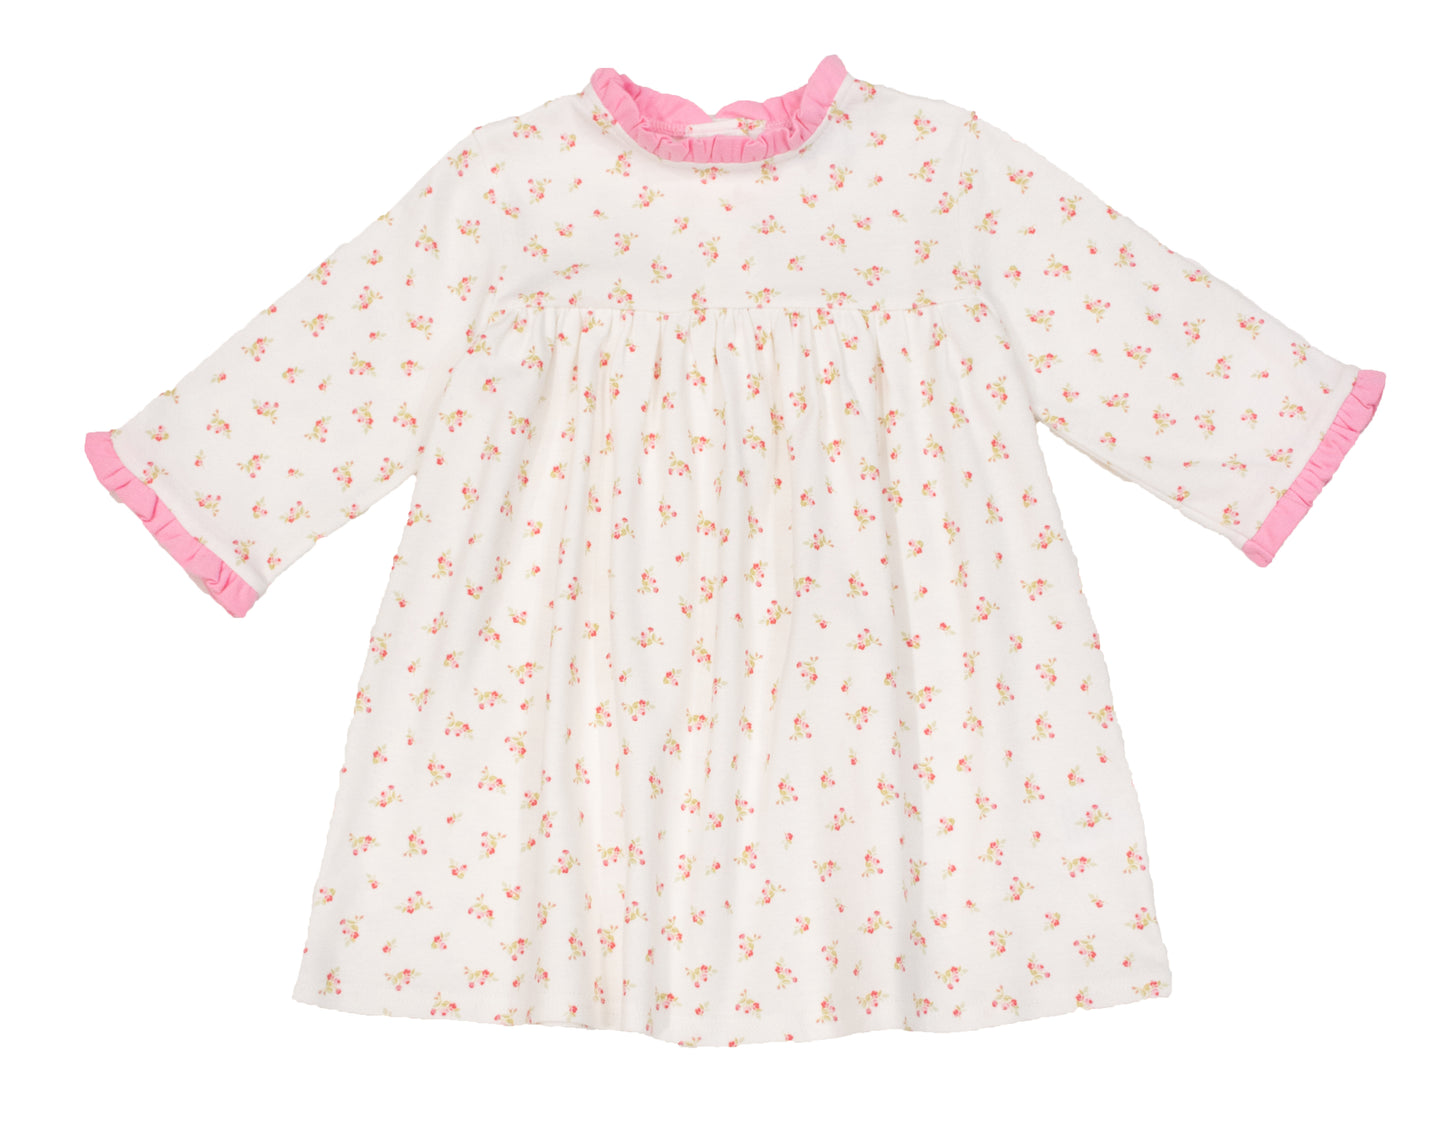 Pink floral Lottie tunic - PREORDER*